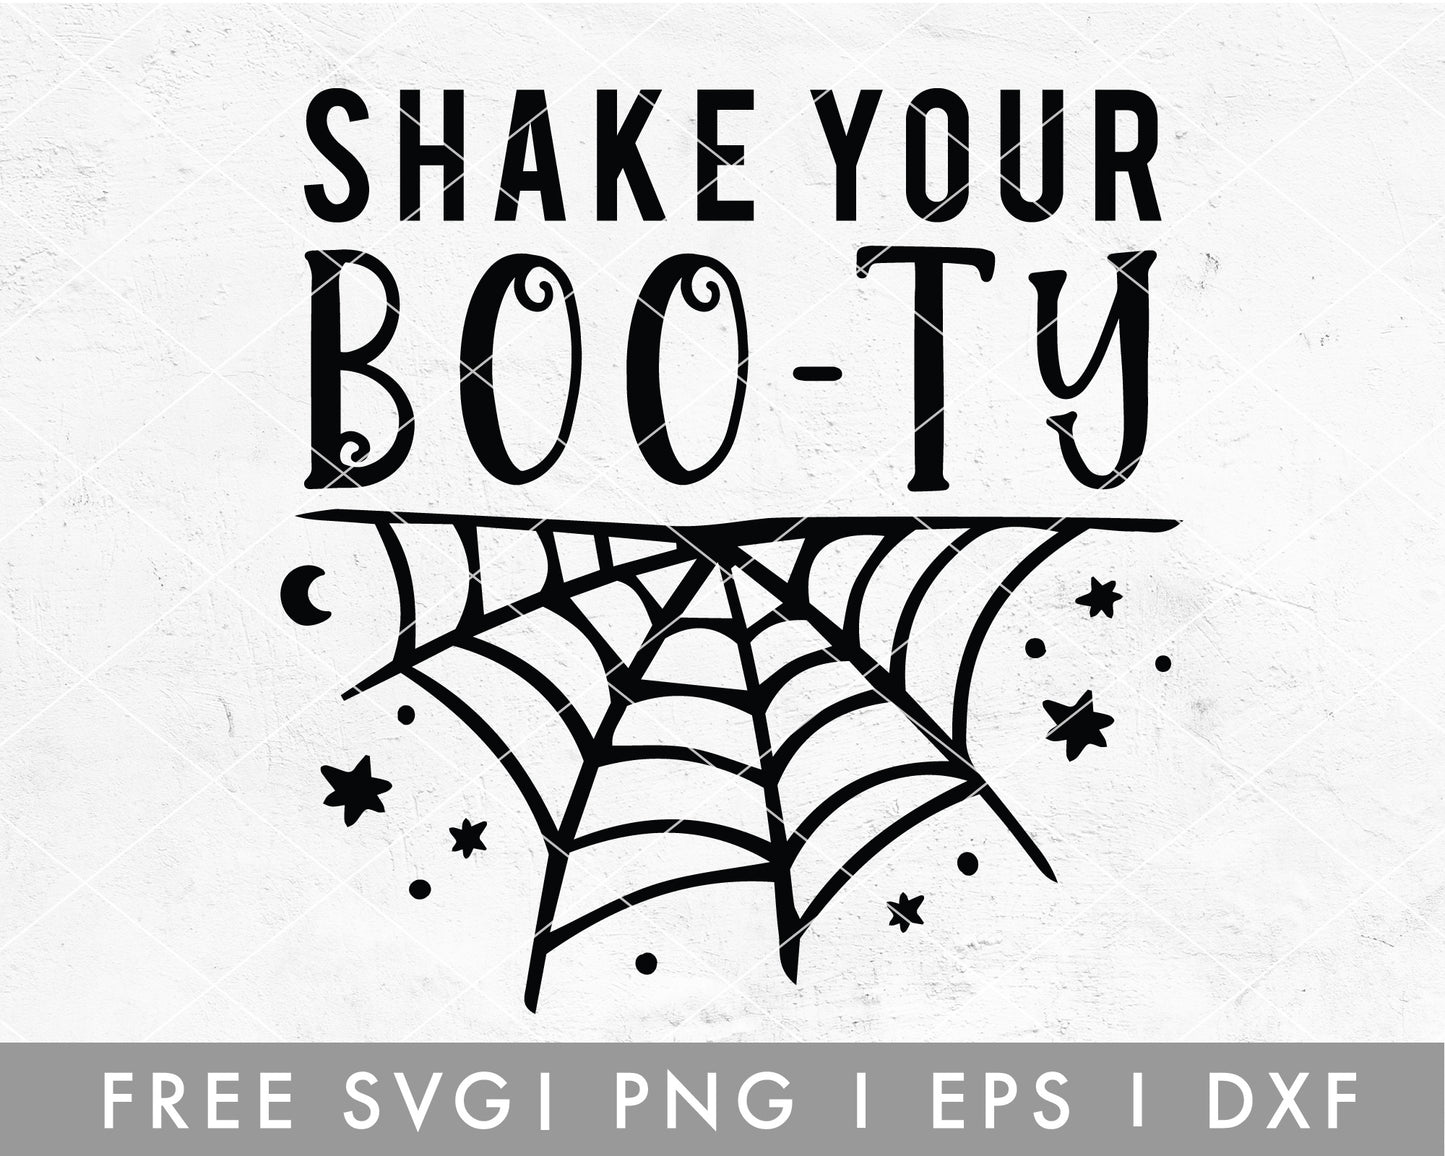 FREE Shake Your Booty SVG Cut File for Cricut, Cameo Silhouette | Halloween SVG Cut File For Kids, Funny Halloween Quote SVG